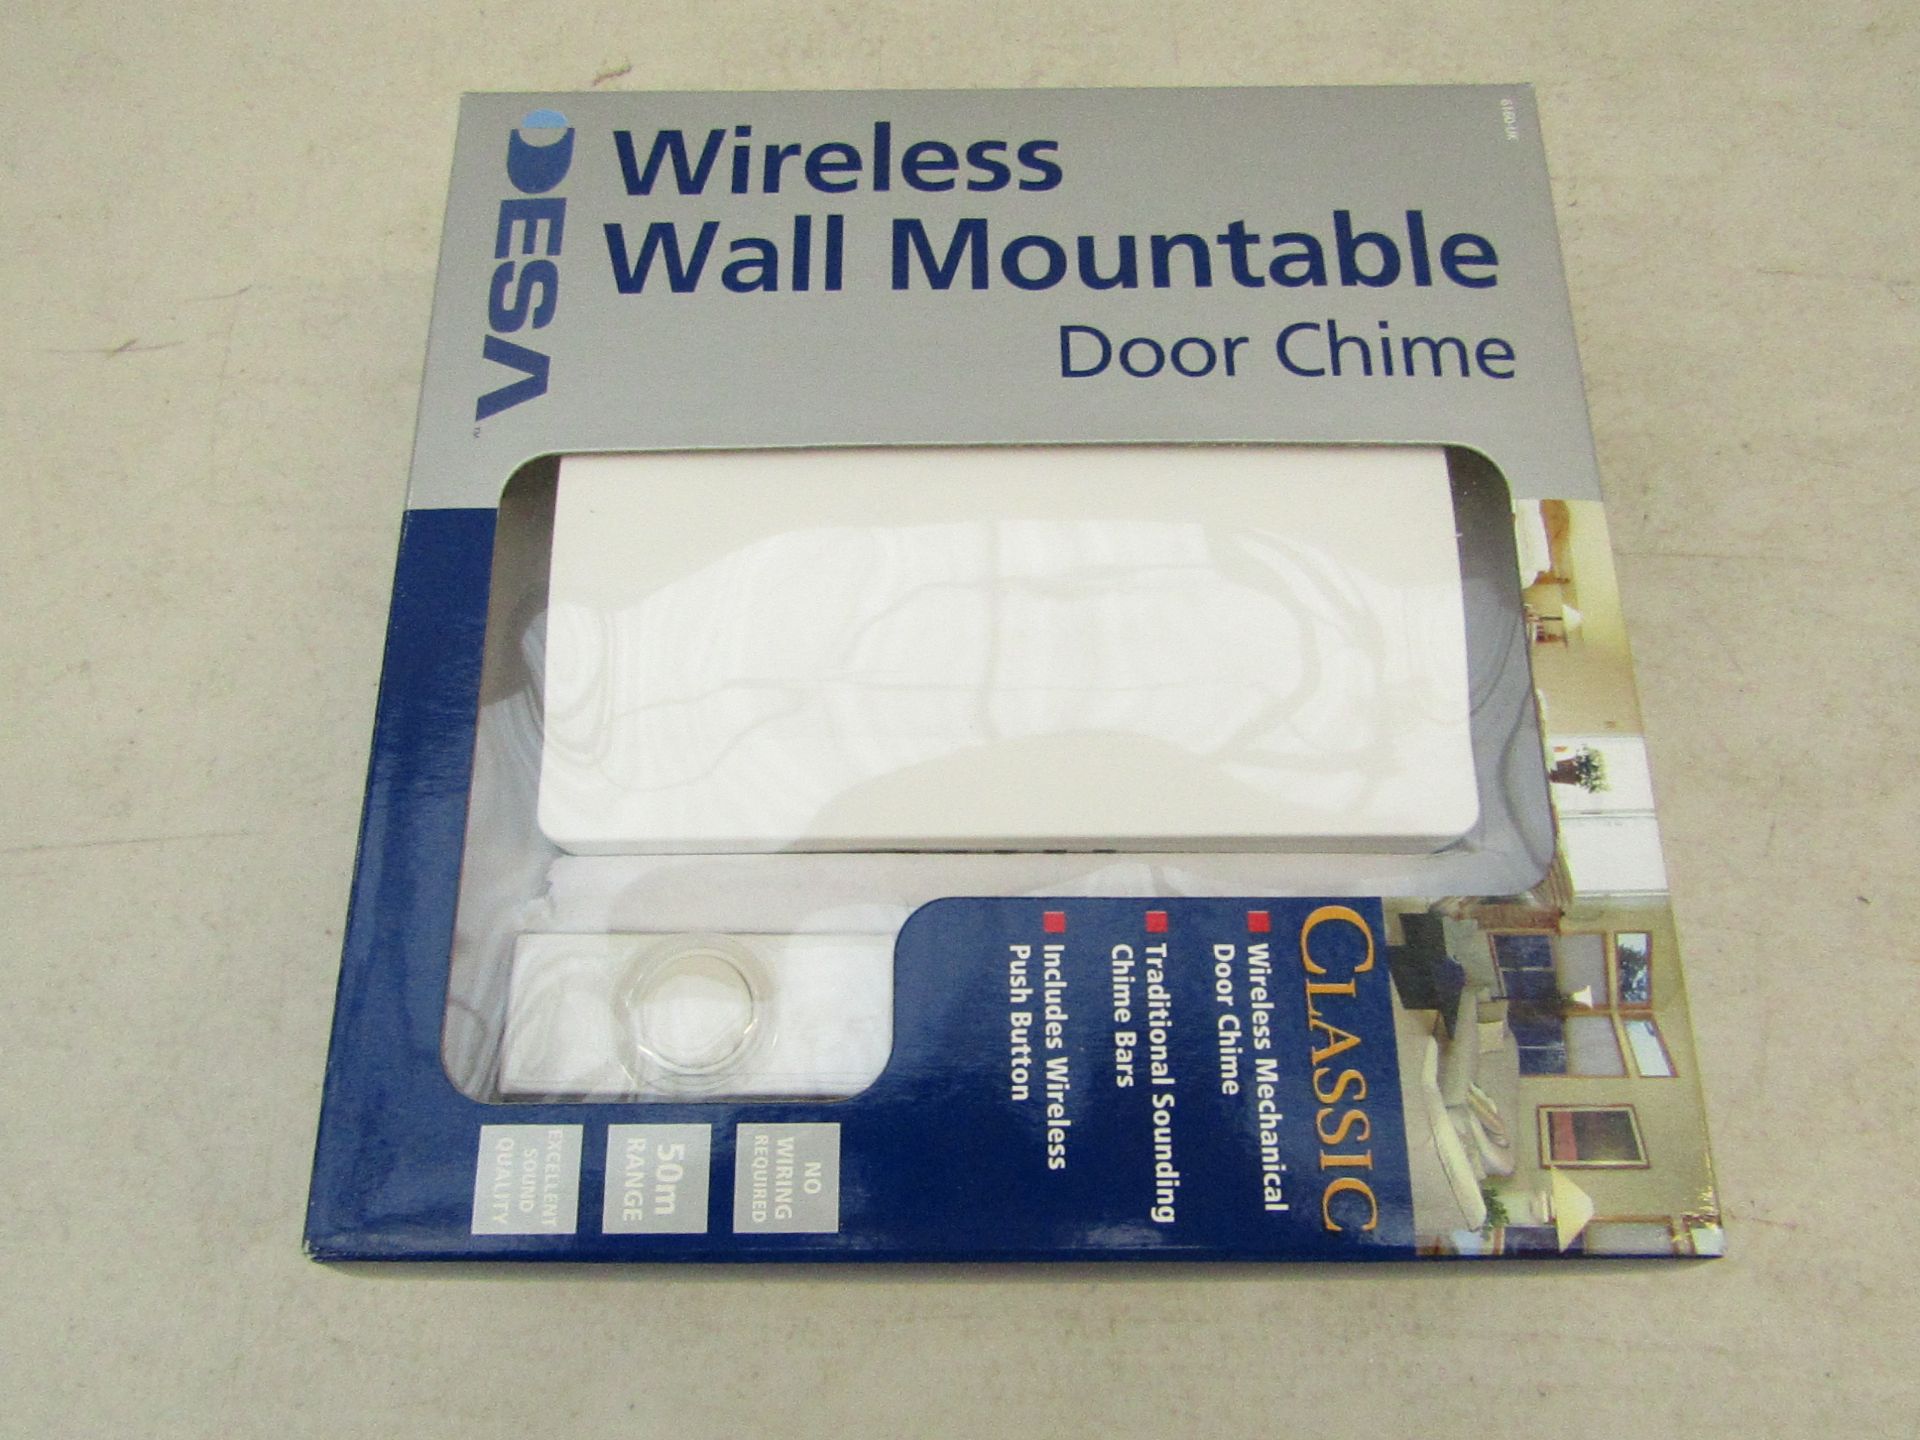 Desa wireless wall mounted door chime, new and packaged.